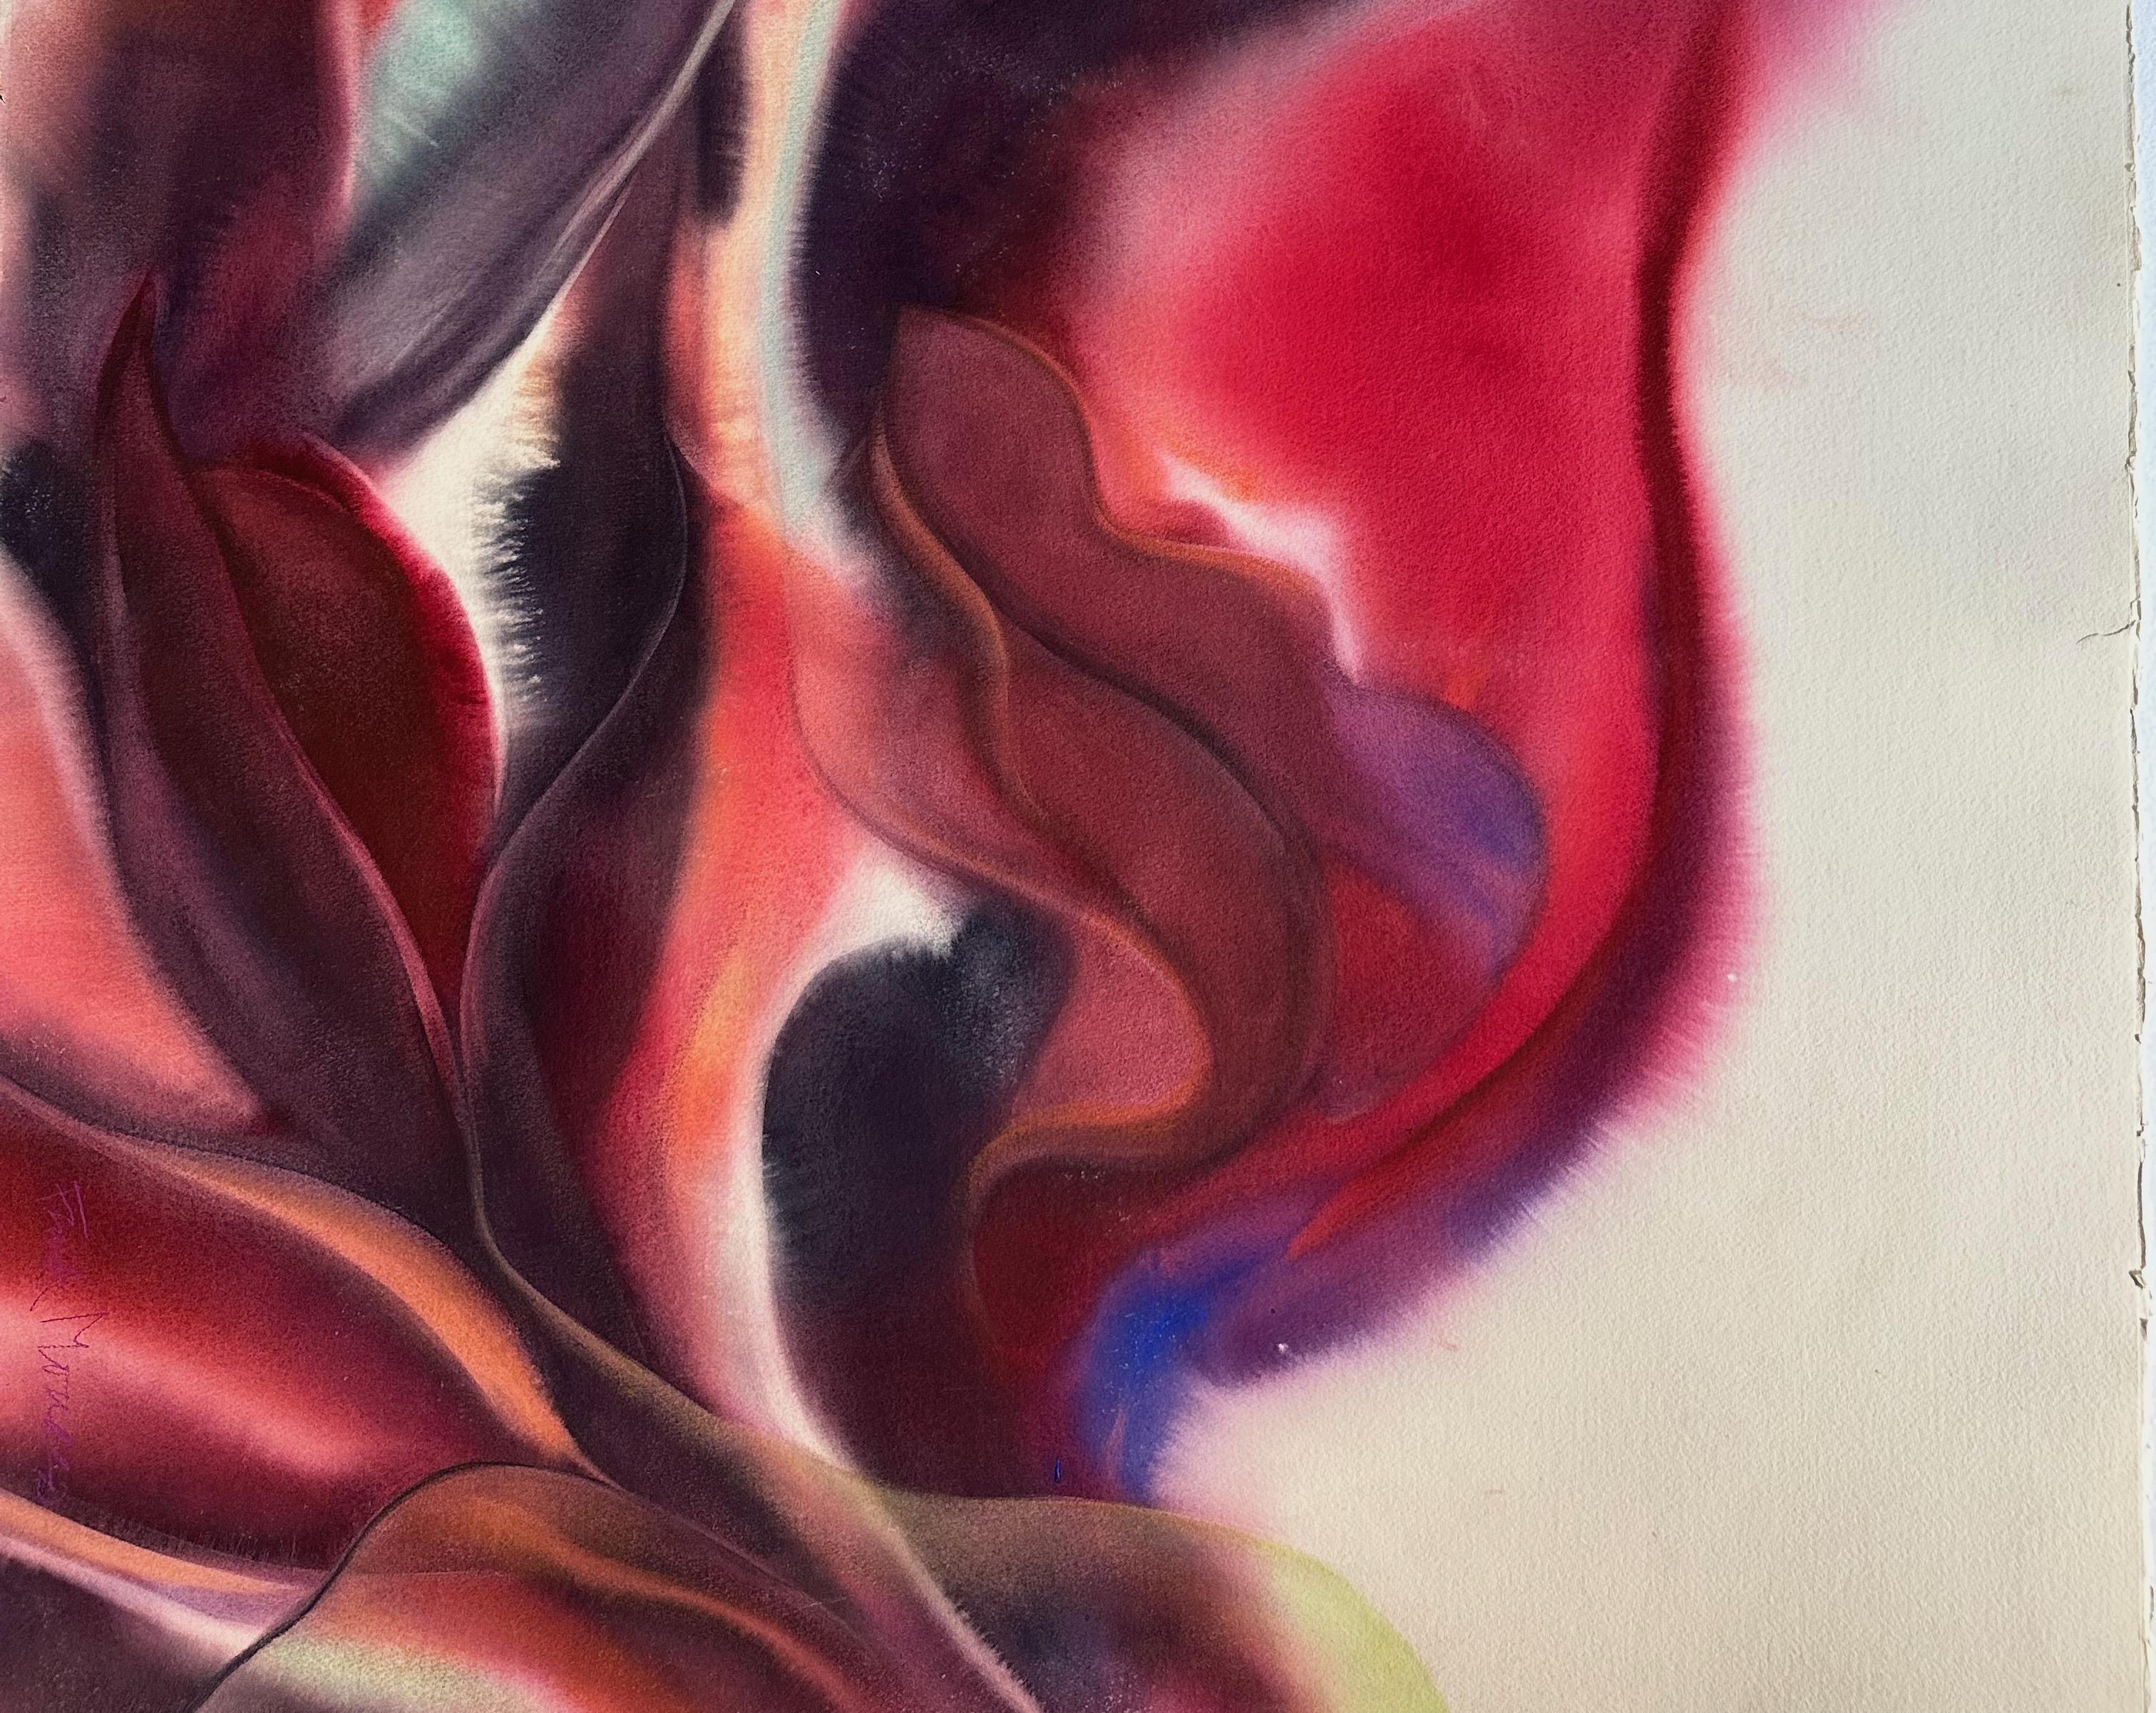 Hot Flame Abstract I Work On Paper - Painting by Frank Monaco